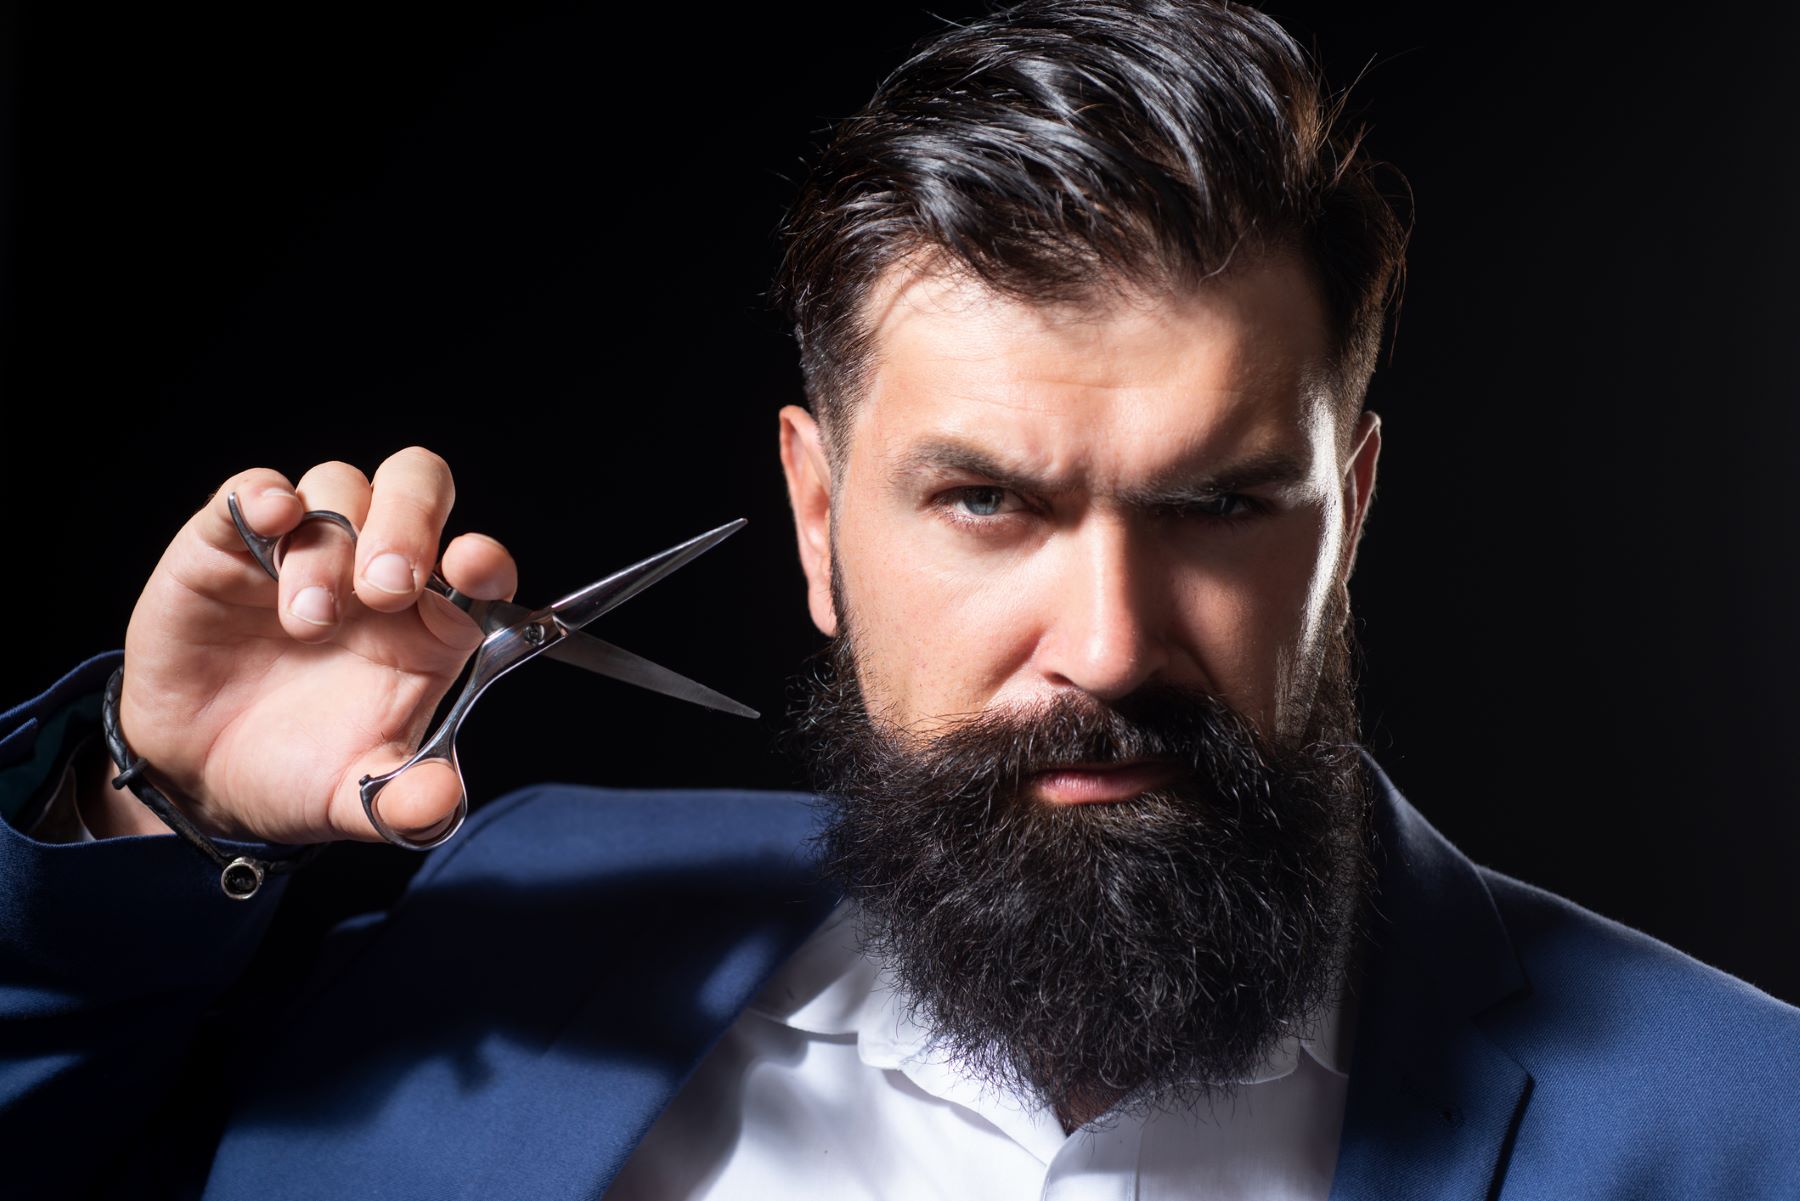 Man preparing to clip his unruly beard tufts with scissors